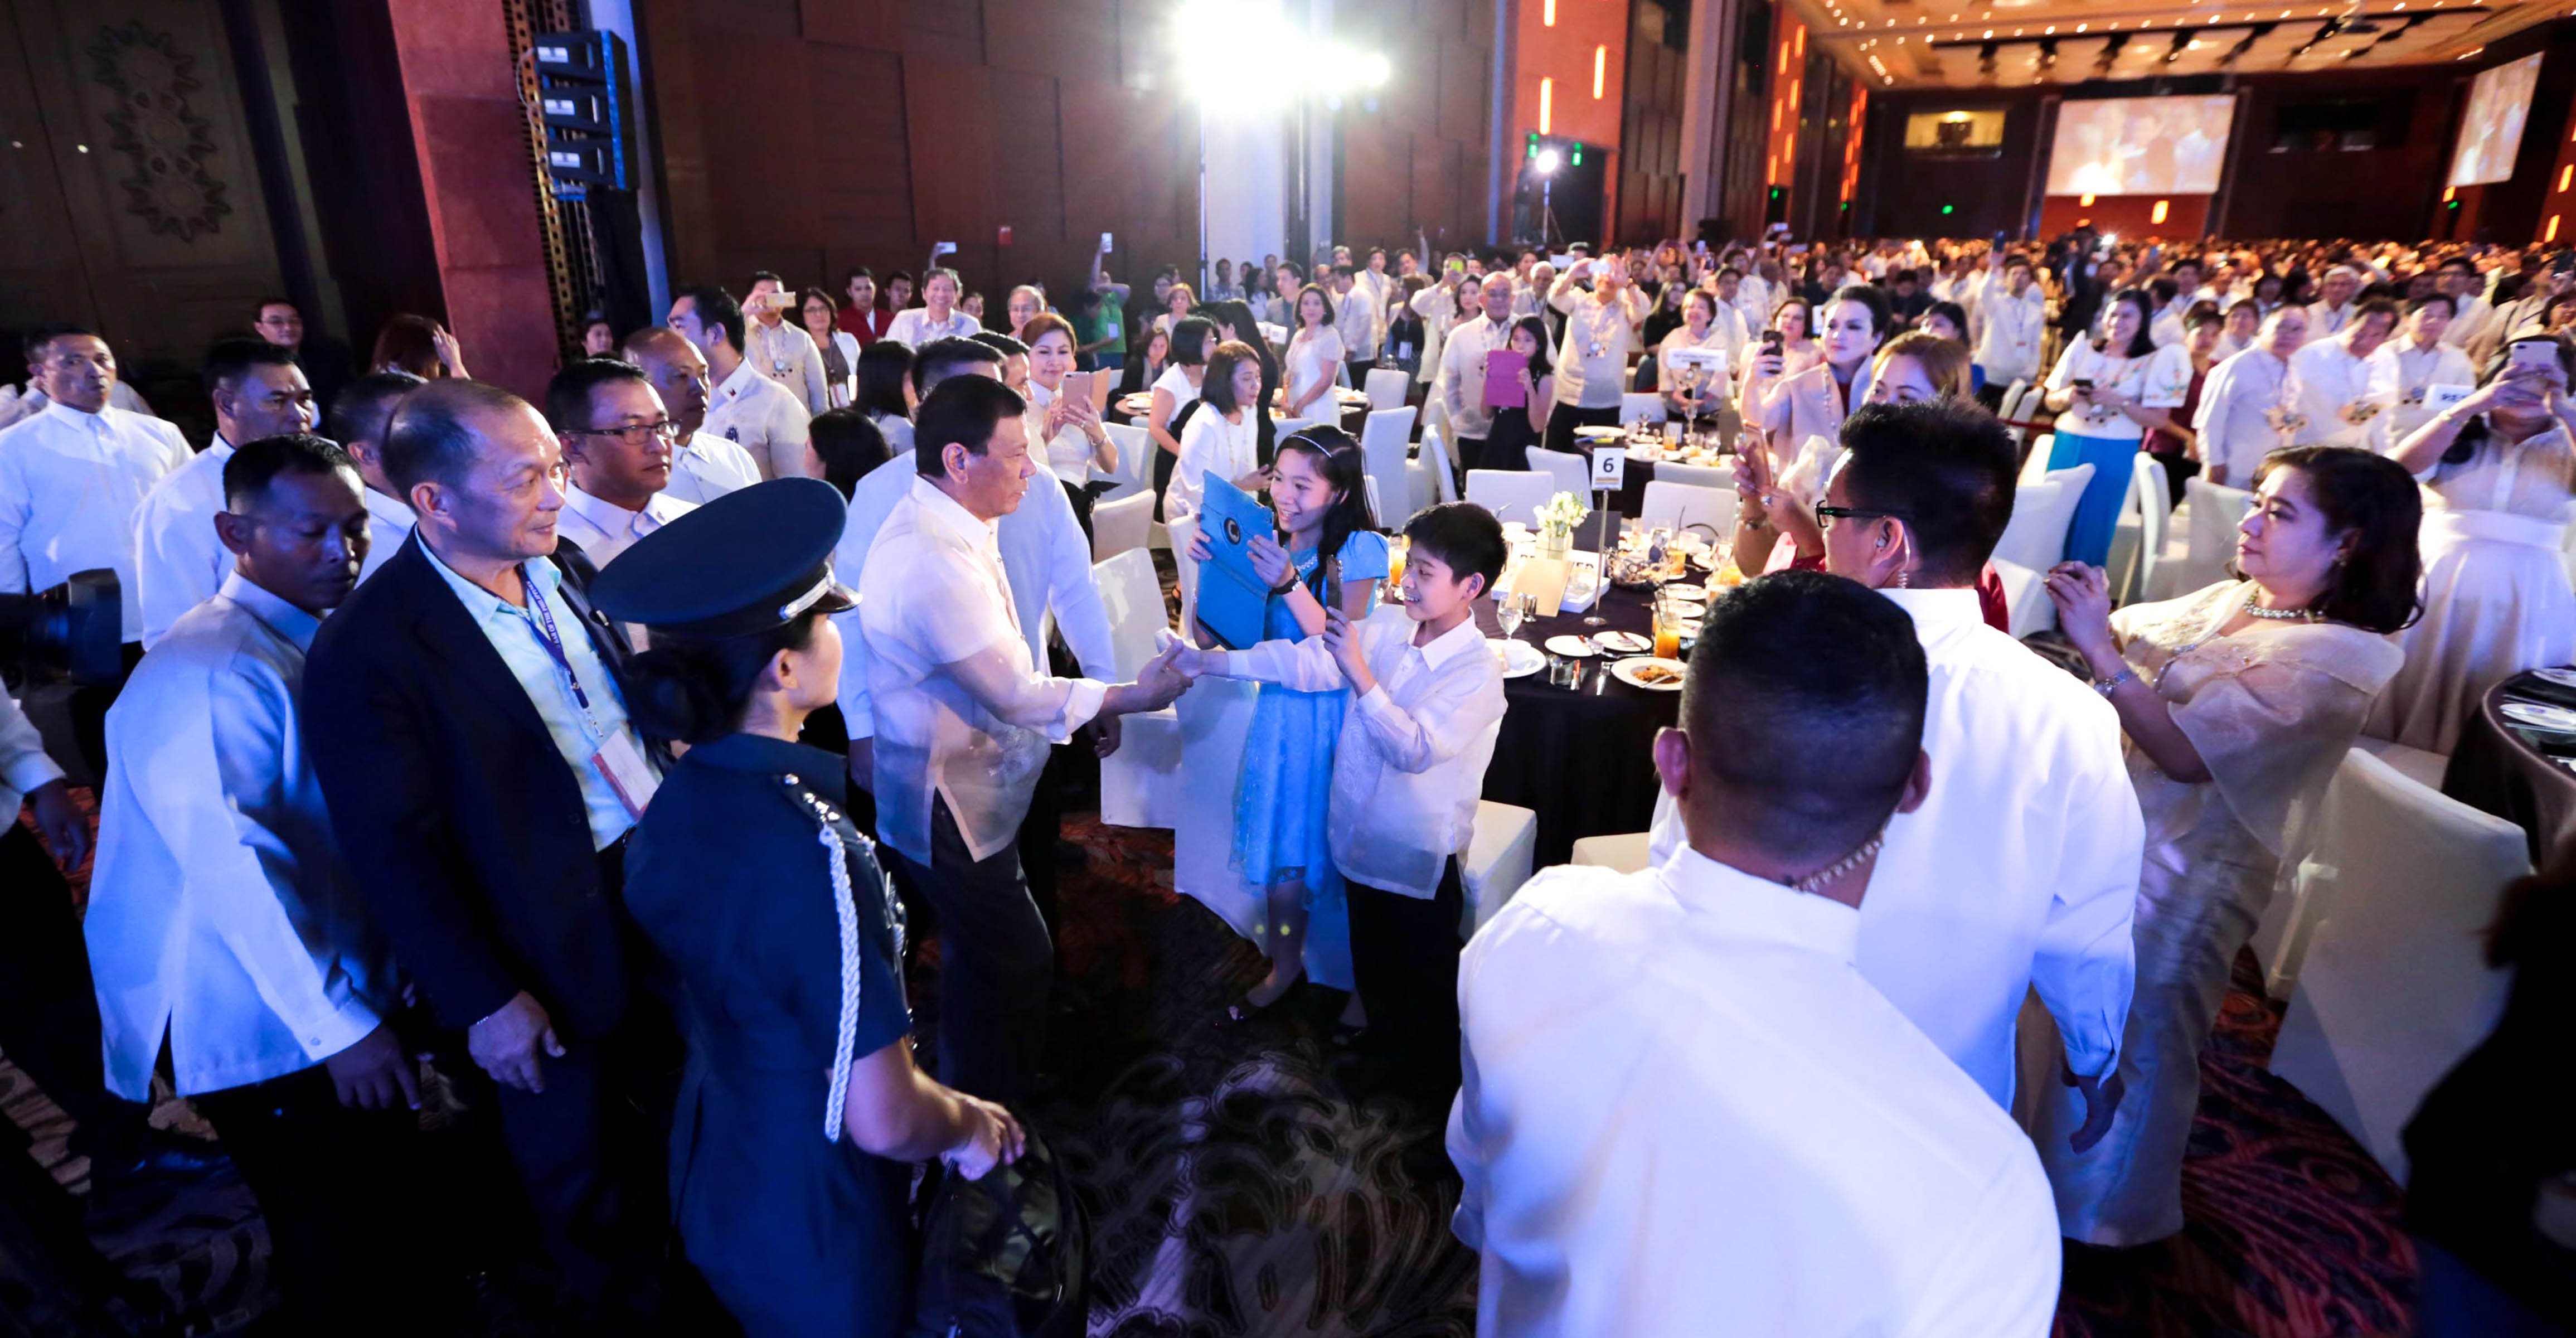 Pres. Duterte urges lawyers to be loyal to their oath, country